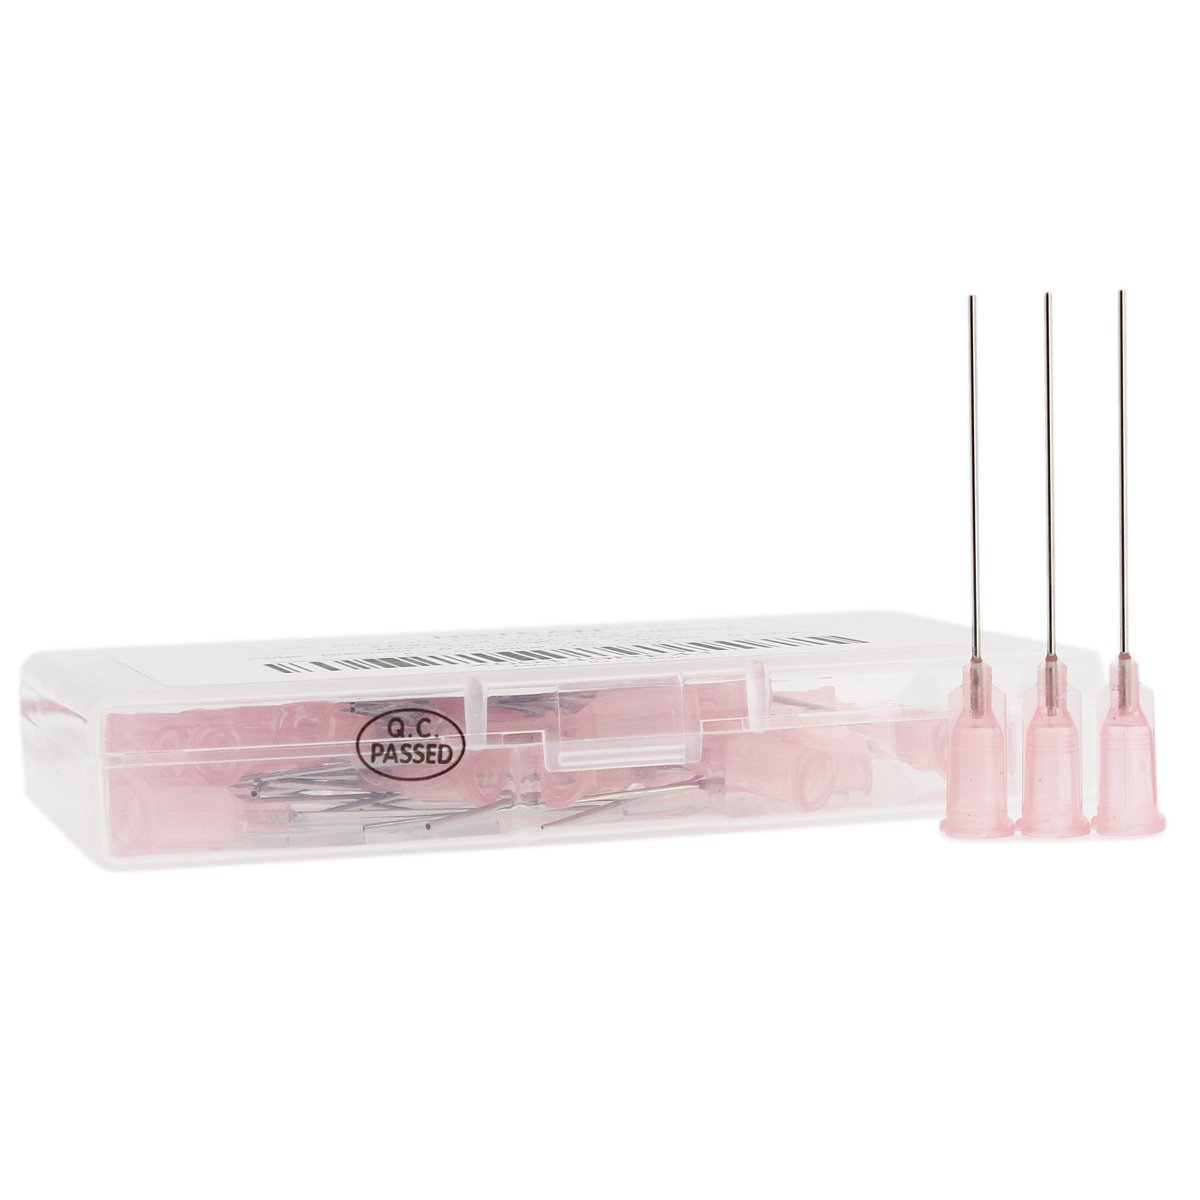 1ml Syringe with 18Ga 1.5” Blunt Needle and Plastic Needle with Matching  Cap (Pack of 10)